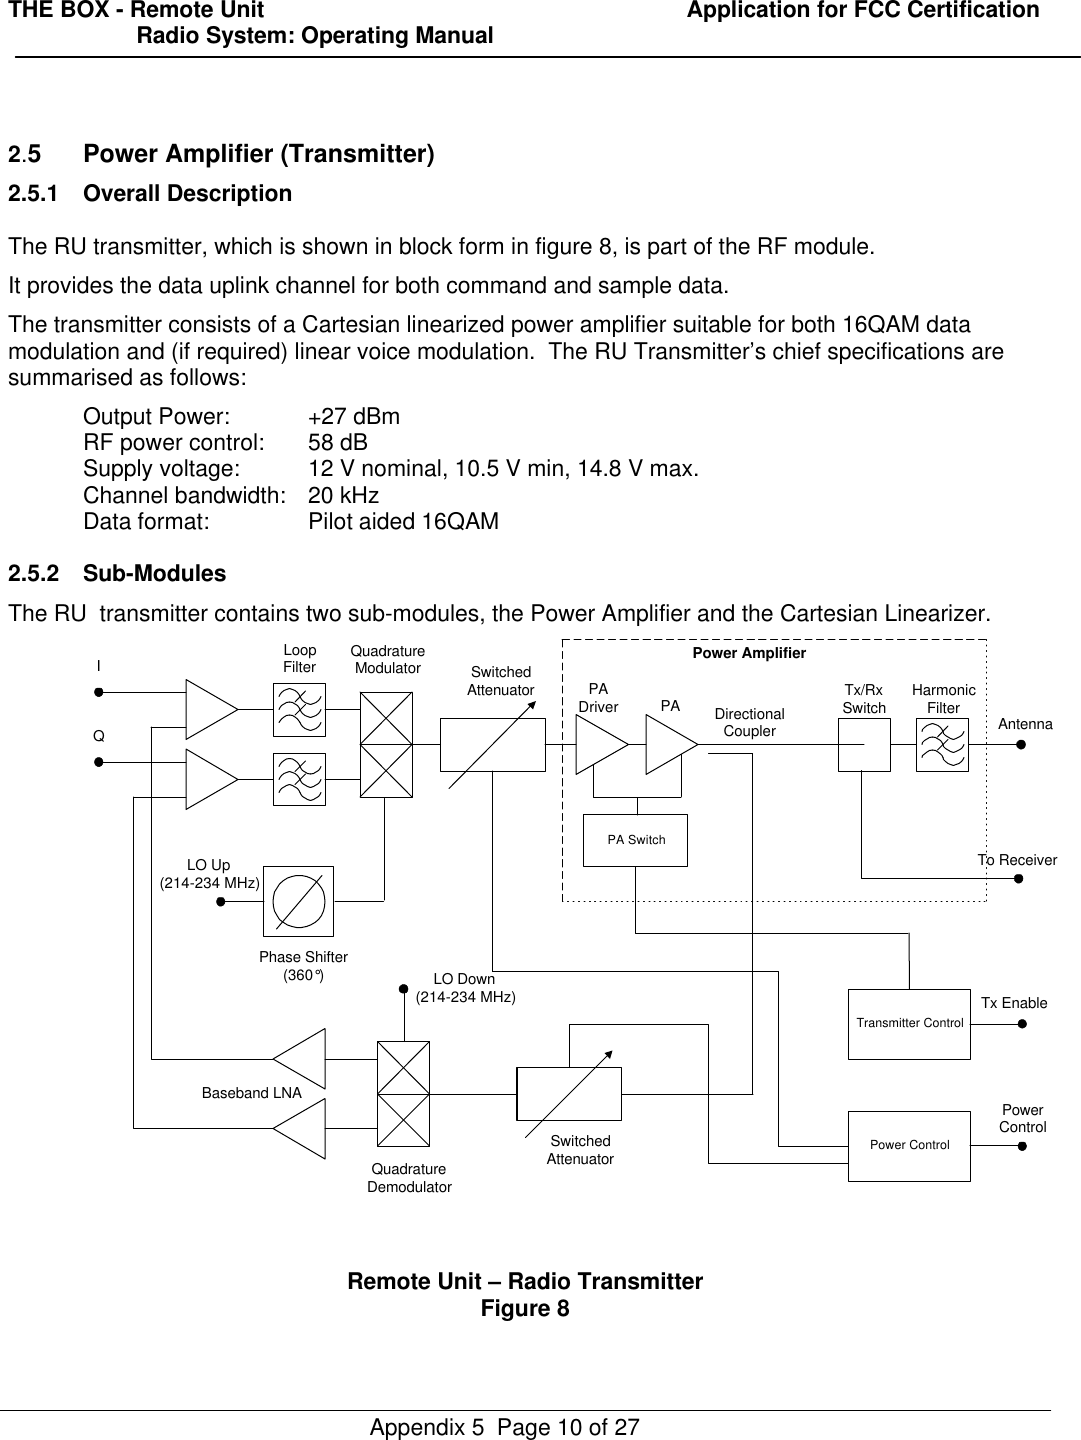 THE BOX - Remote Unit                                                                  Application for FCC Certification                    Radio System: Operating ManualAppendix 5  Page 10 of 272.5Power Amplifier (Transmitter)2.5.1 Overall DescriptionThe RU transmitter, which is shown in block form in figure 8, is part of the RF module.It provides the data uplink channel for both command and sample data.The transmitter consists of a Cartesian linearized power amplifier suitable for both 16QAM datamodulation and (if required) linear voice modulation.  The RU Transmitter’s chief specifications aresummarised as follows:Output Power: +27 dBmRF power control: 58 dBSupply voltage: 12 V nominal, 10.5 V min, 14.8 V max.Channel bandwidth: 20 kHzData format: Pilot aided 16QAM2.5.2 Sub-ModulesThe RU  transmitter contains two sub-modules, the Power Amplifier and the Cartesian Linearizer.Power ControlTransmitter ControlPA SwitchSwitchedAttenuatorQuadratureDemodulatorBaseband LNAPhase Shifter(360°)LoopFilter QuadratureModulator SwitchedAttenuator PADriver PA Tx/RxSwitch HarmonicFilter AntennaTx EnablePowerControlLO Up(214-234 MHz)IQLO Down(214-234 MHz)DirectionalCouplerTo ReceiverPower AmplifierRemote Unit – Radio TransmitterFigure 8